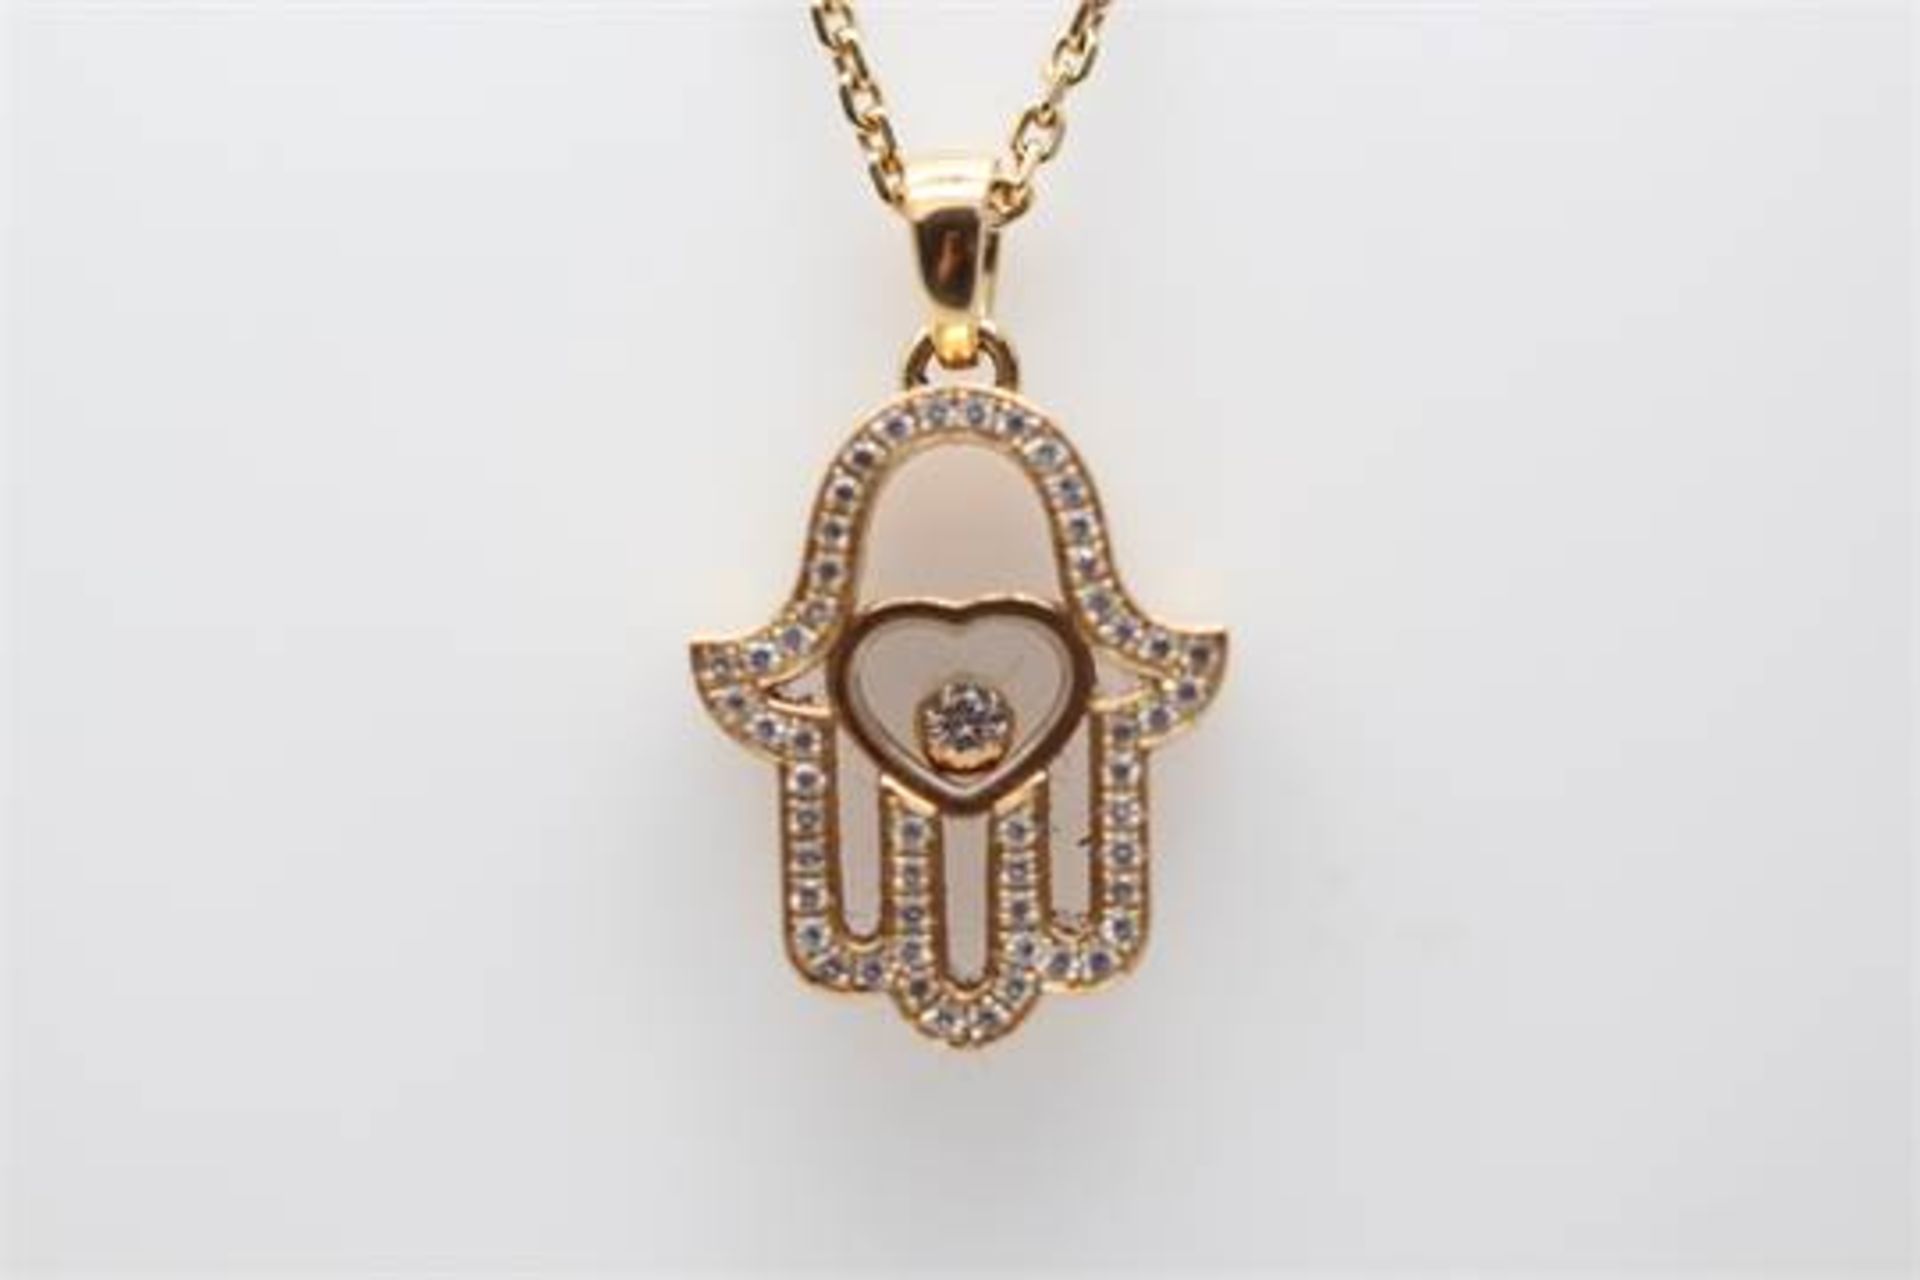 **£3995** CHOPARD FLOATING DIAMOND LADIES NECKLACE, SET WITH LUCK CHARM PENDENT FULL DIAMOND SET, SO - Image 2 of 4